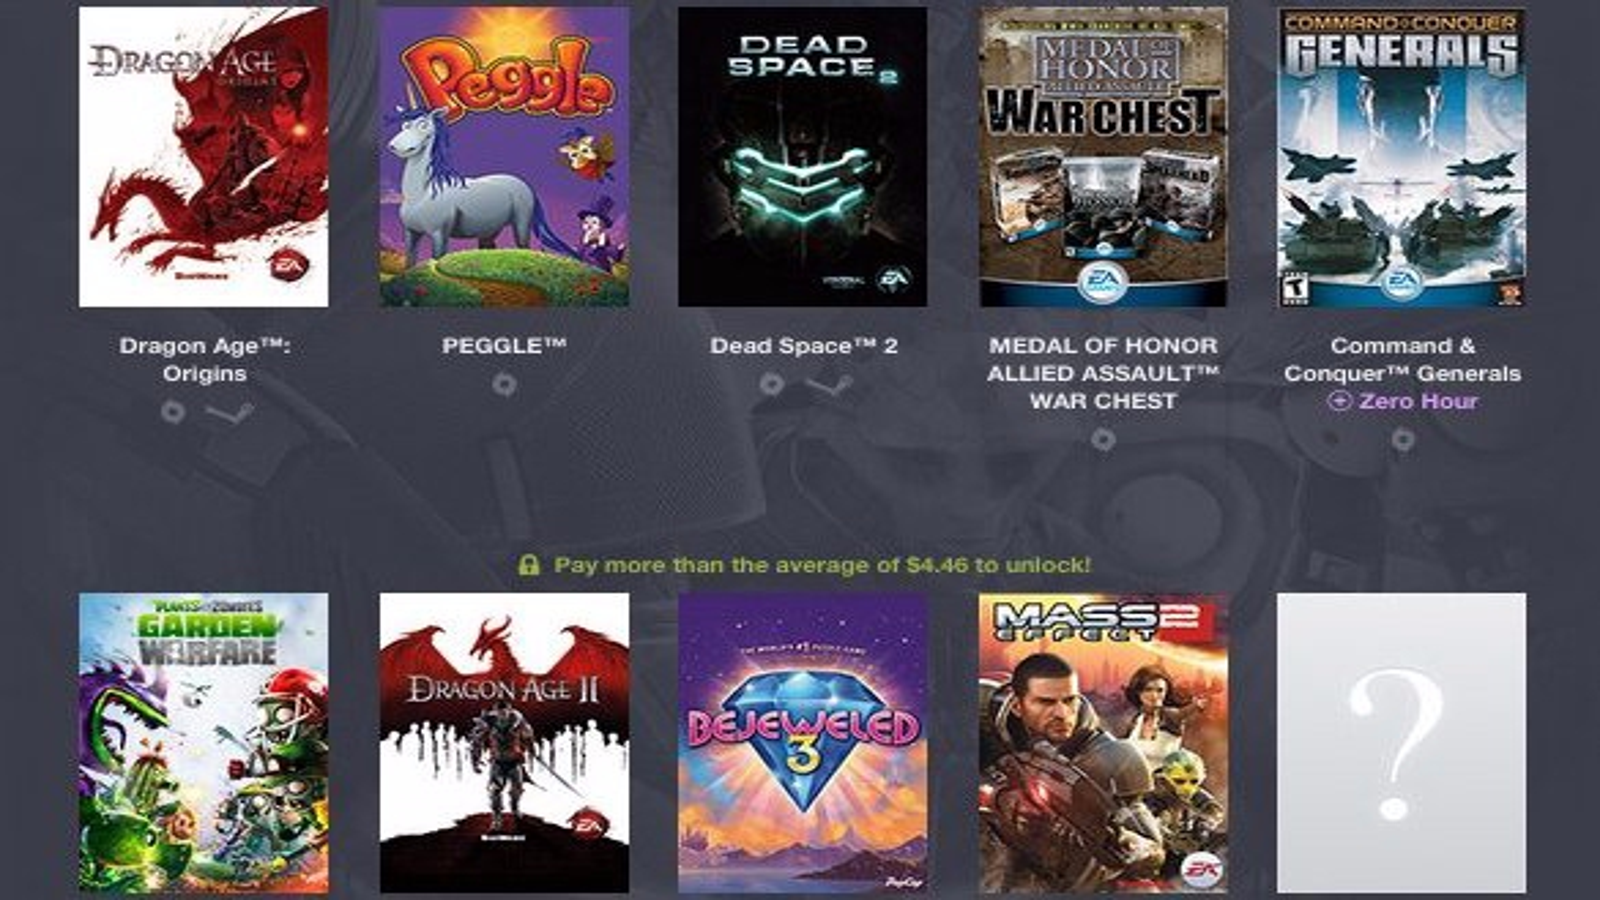 The Humble Bundle for Android 2, Indie Game Bundle Wiki